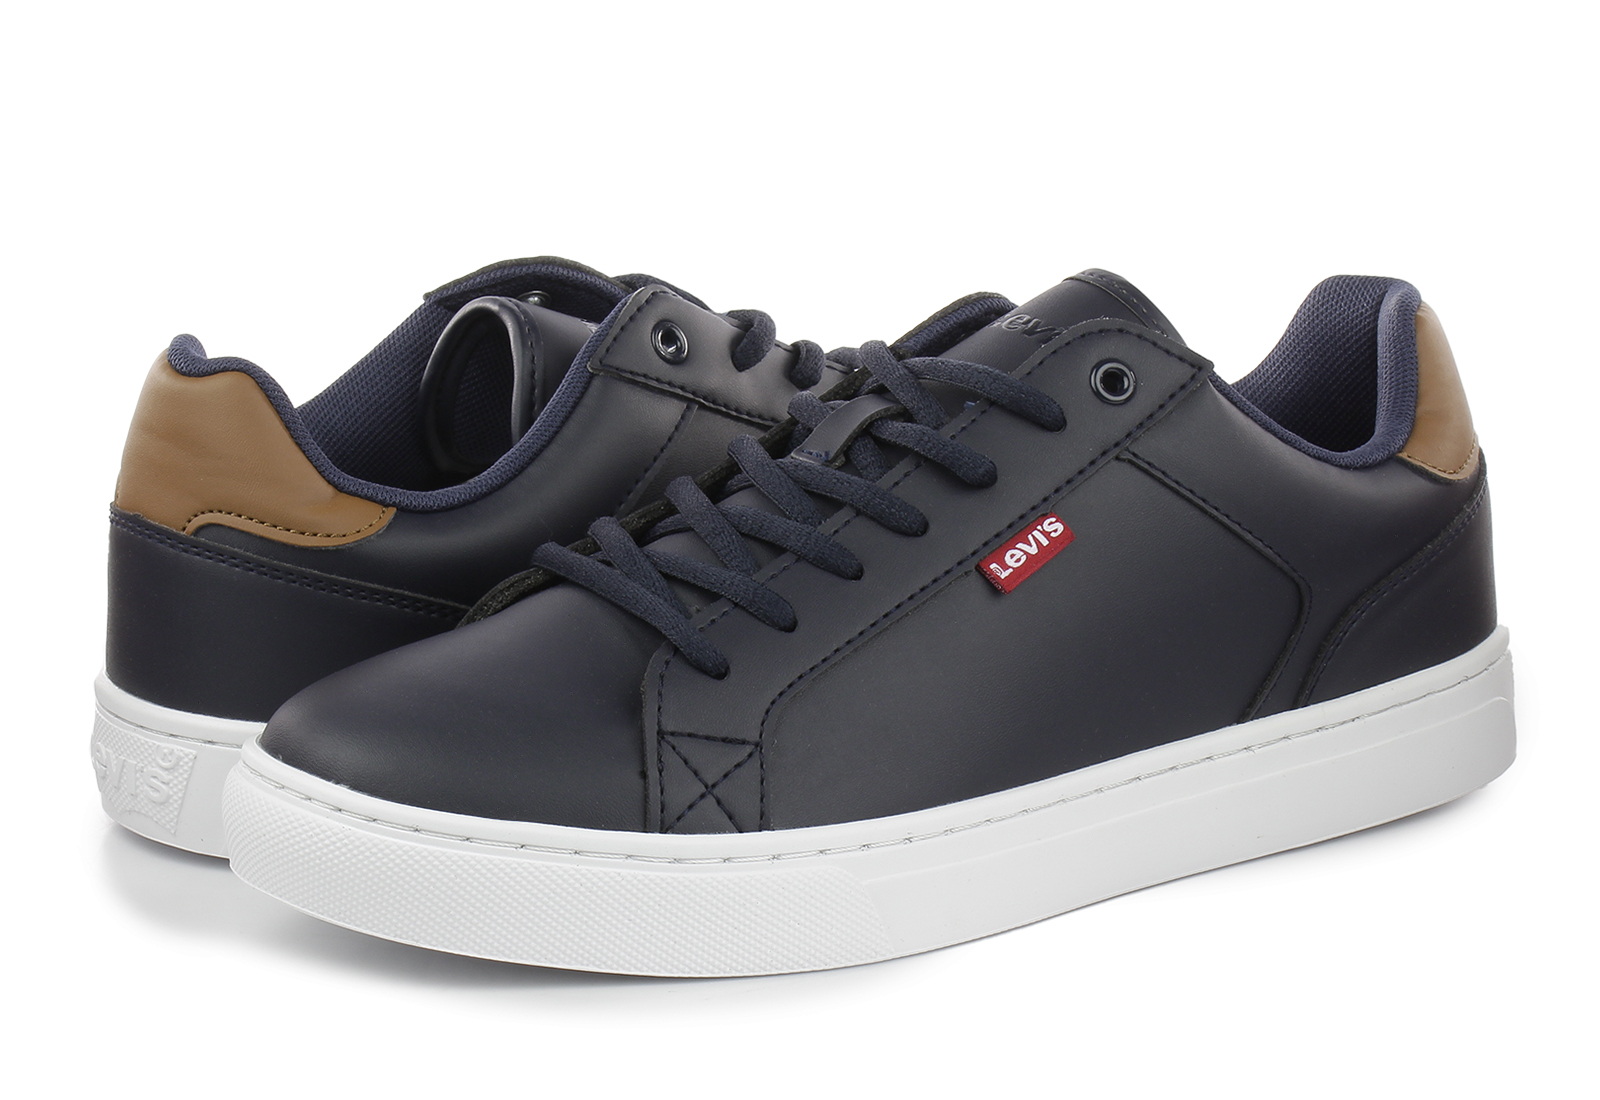 Levis Trainers - Harper - 234571-661-17 - Online shop for sneakers, shoes  and boots